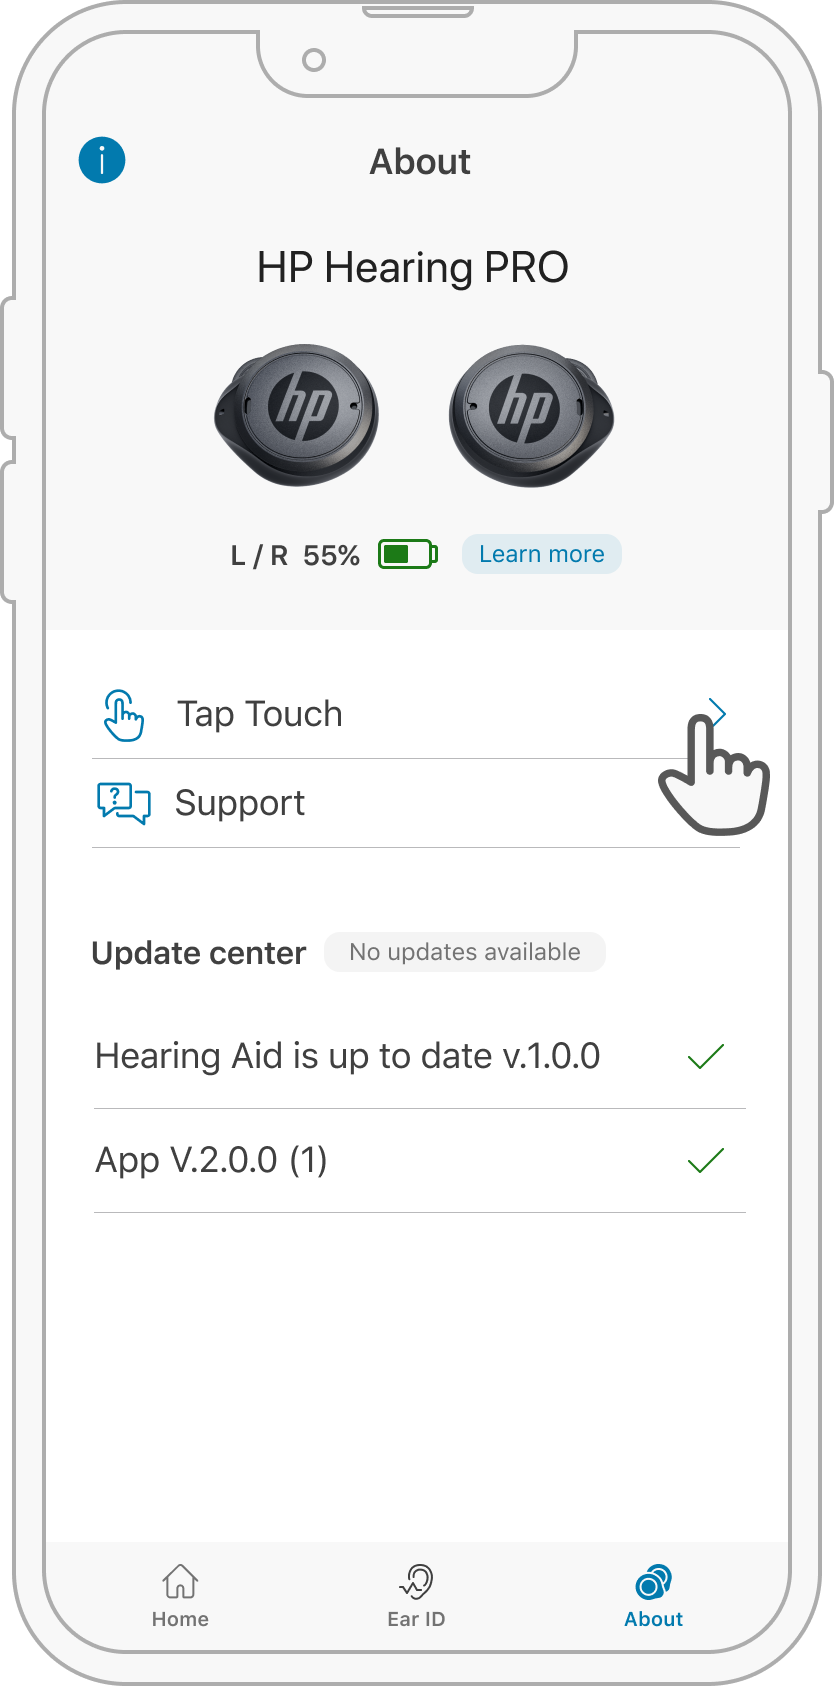 USR-SUP-002-46_-_HP_Hearing_PRO_Support_Asset_____Tap_Touch_Control_for_phone_calls-v1.0.png